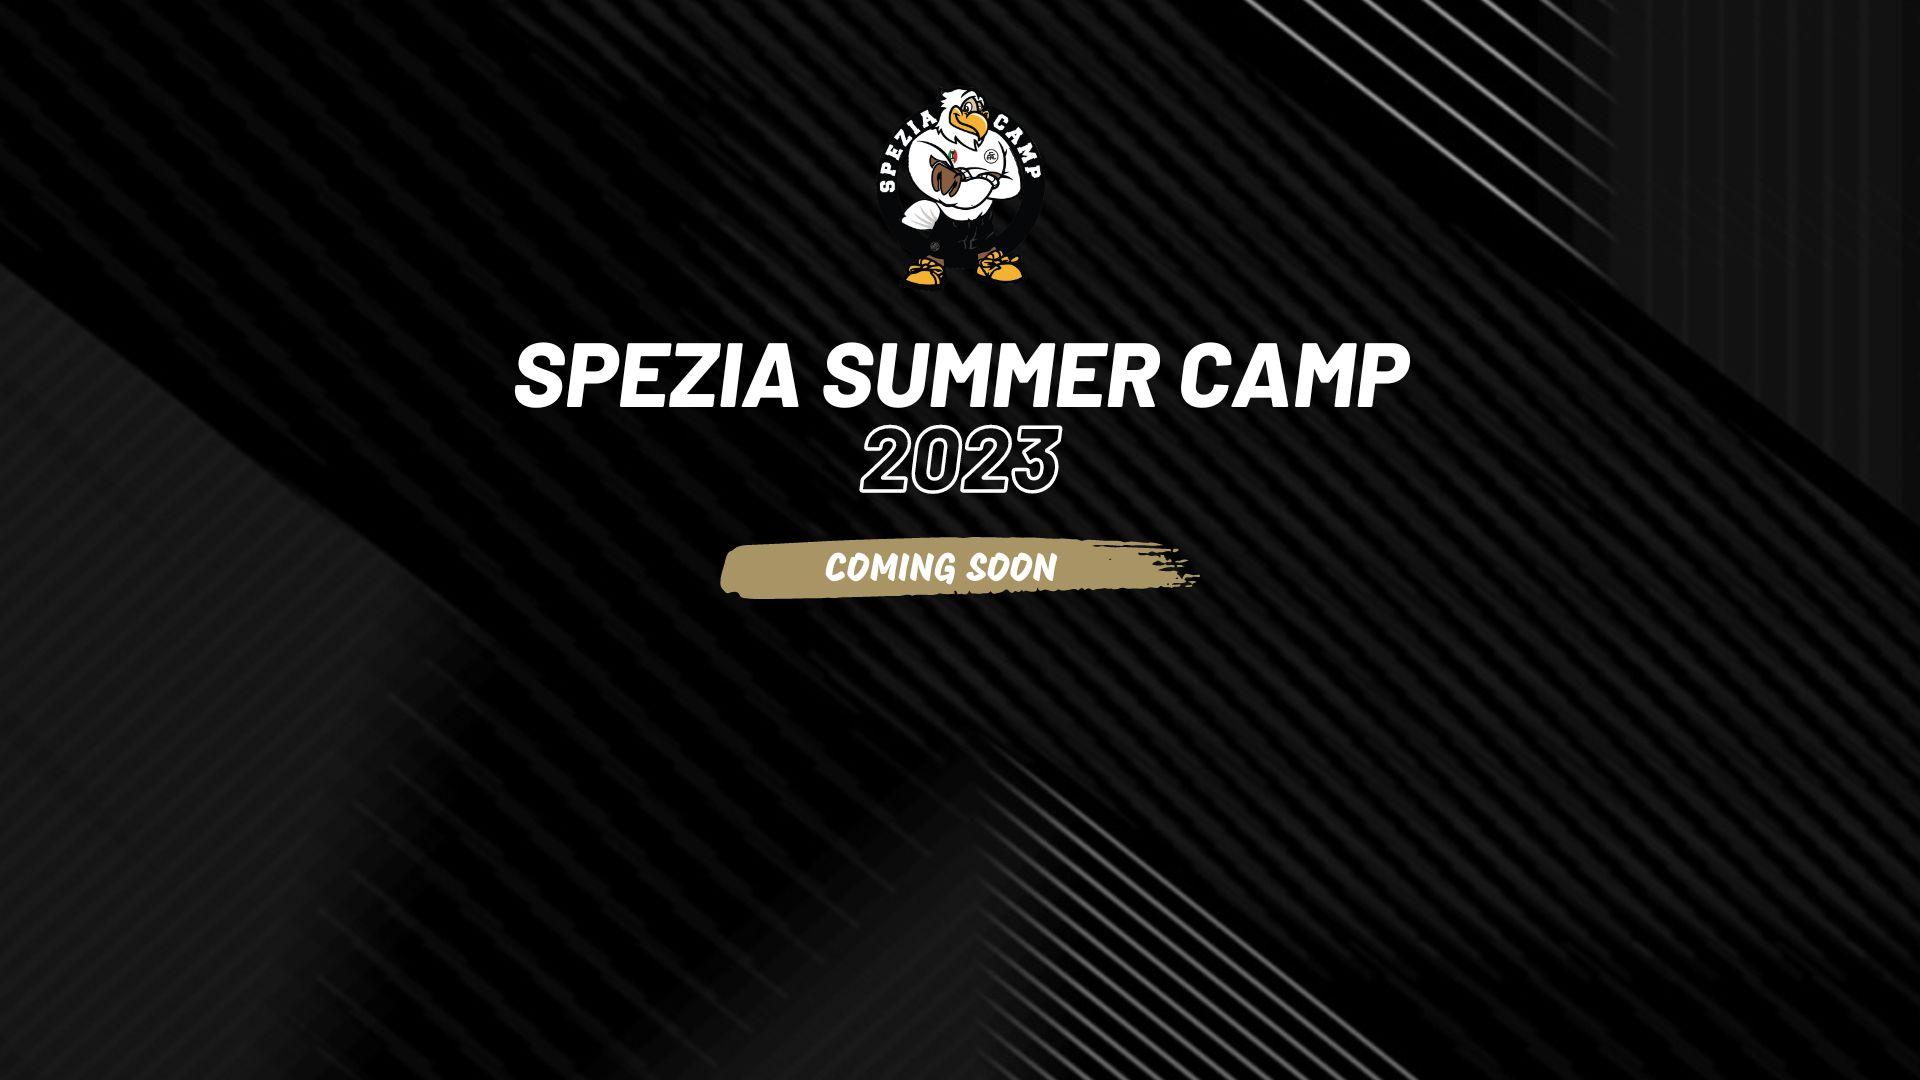 Spezia Summer Camp: The dates of the 2023 edition